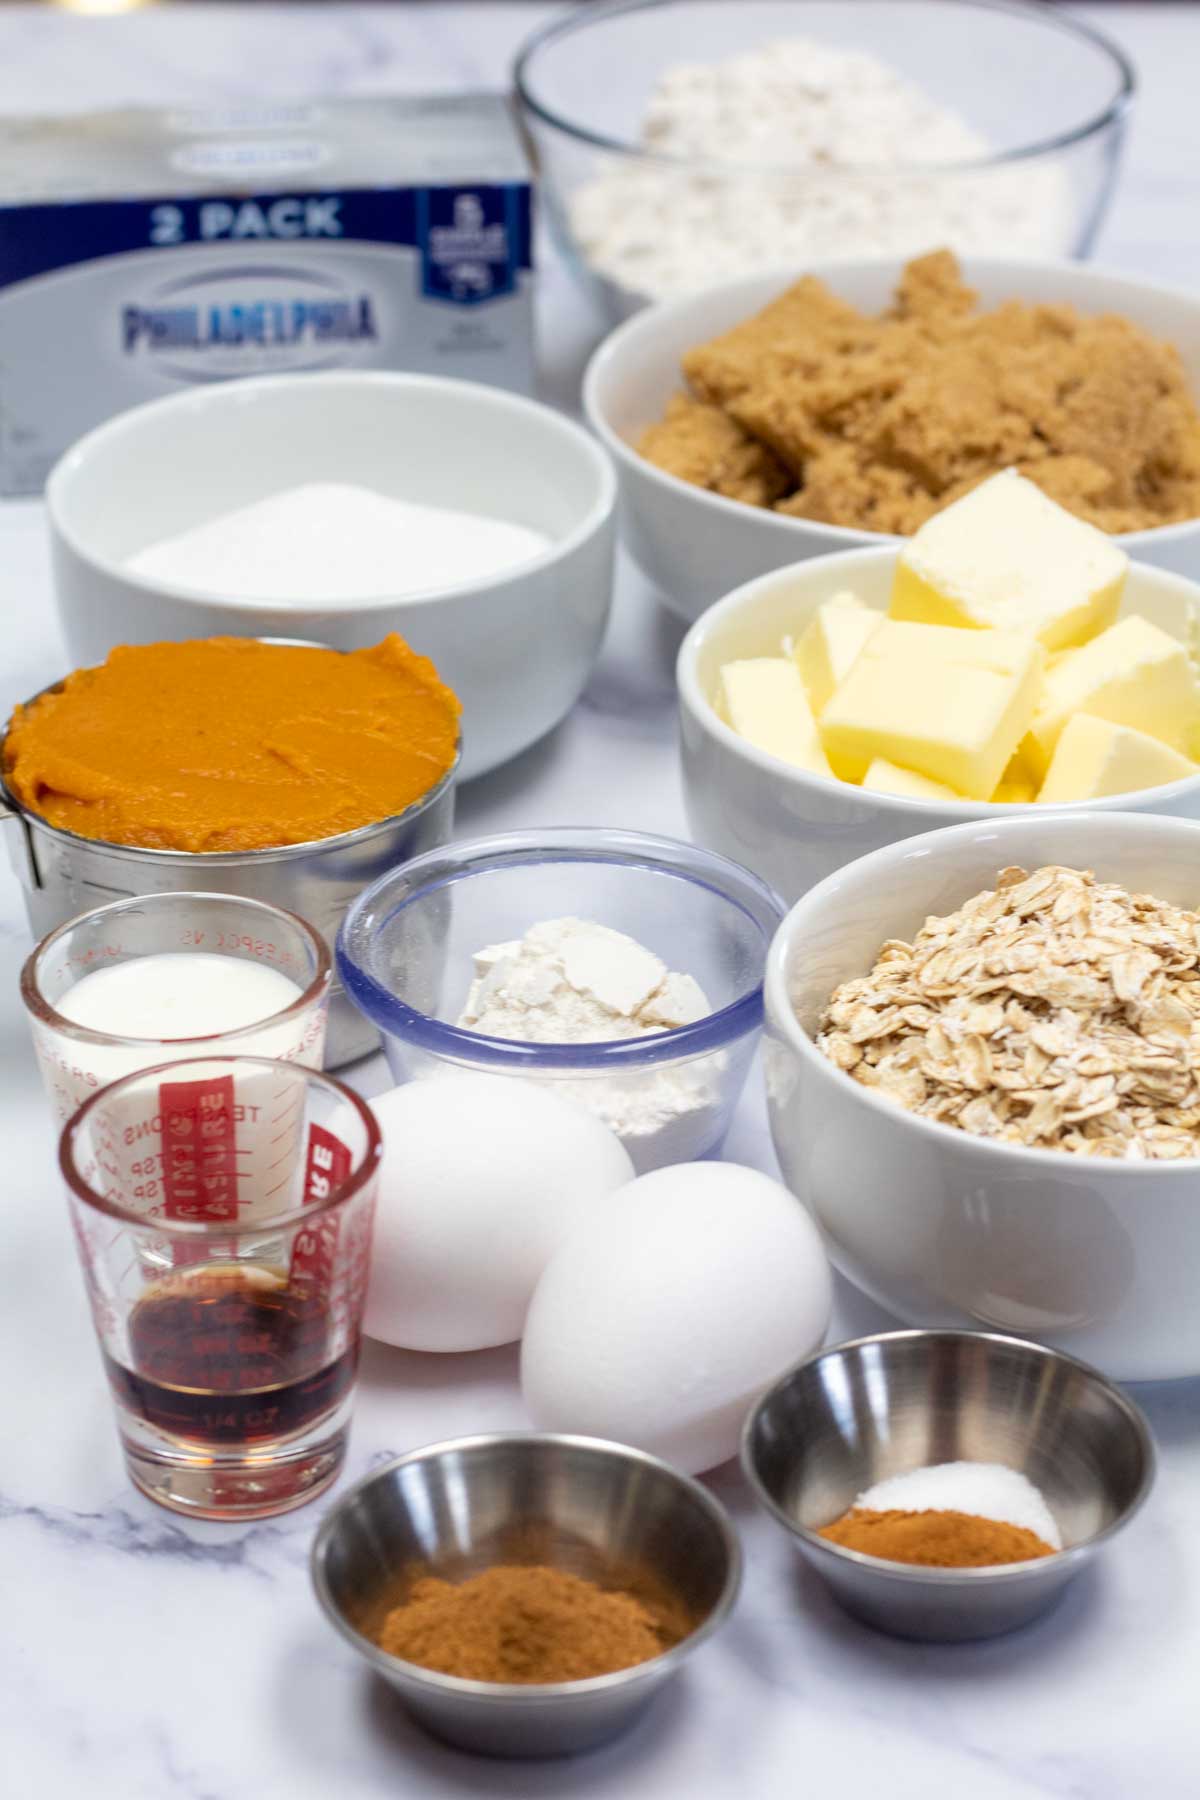 Tall image showing ingredients needed for pumpkin streusel bars.